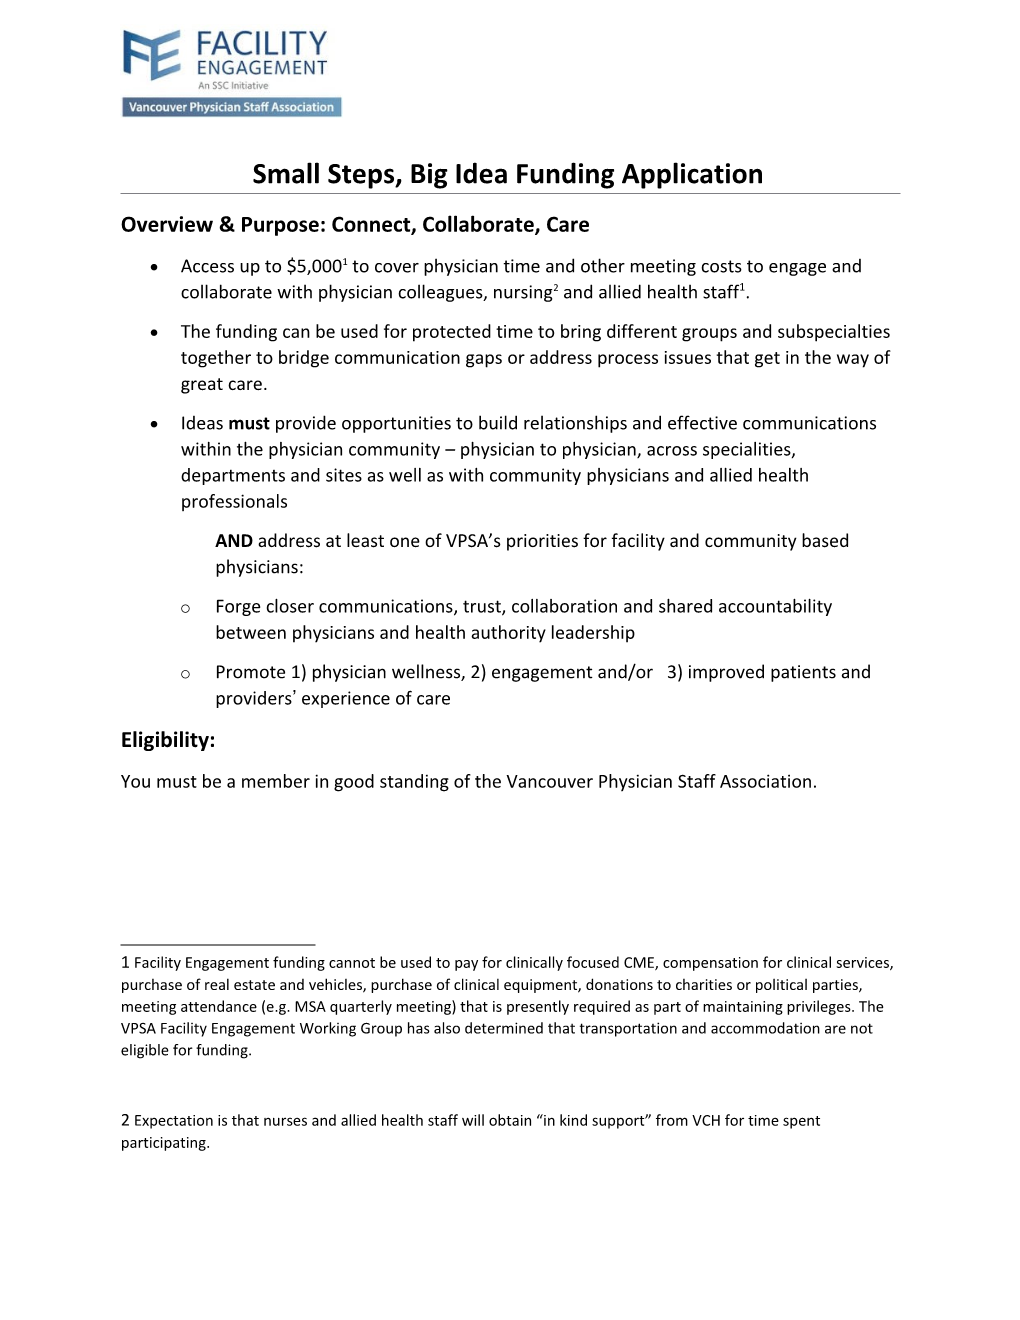 Small Steps, Big Ideafunding Application